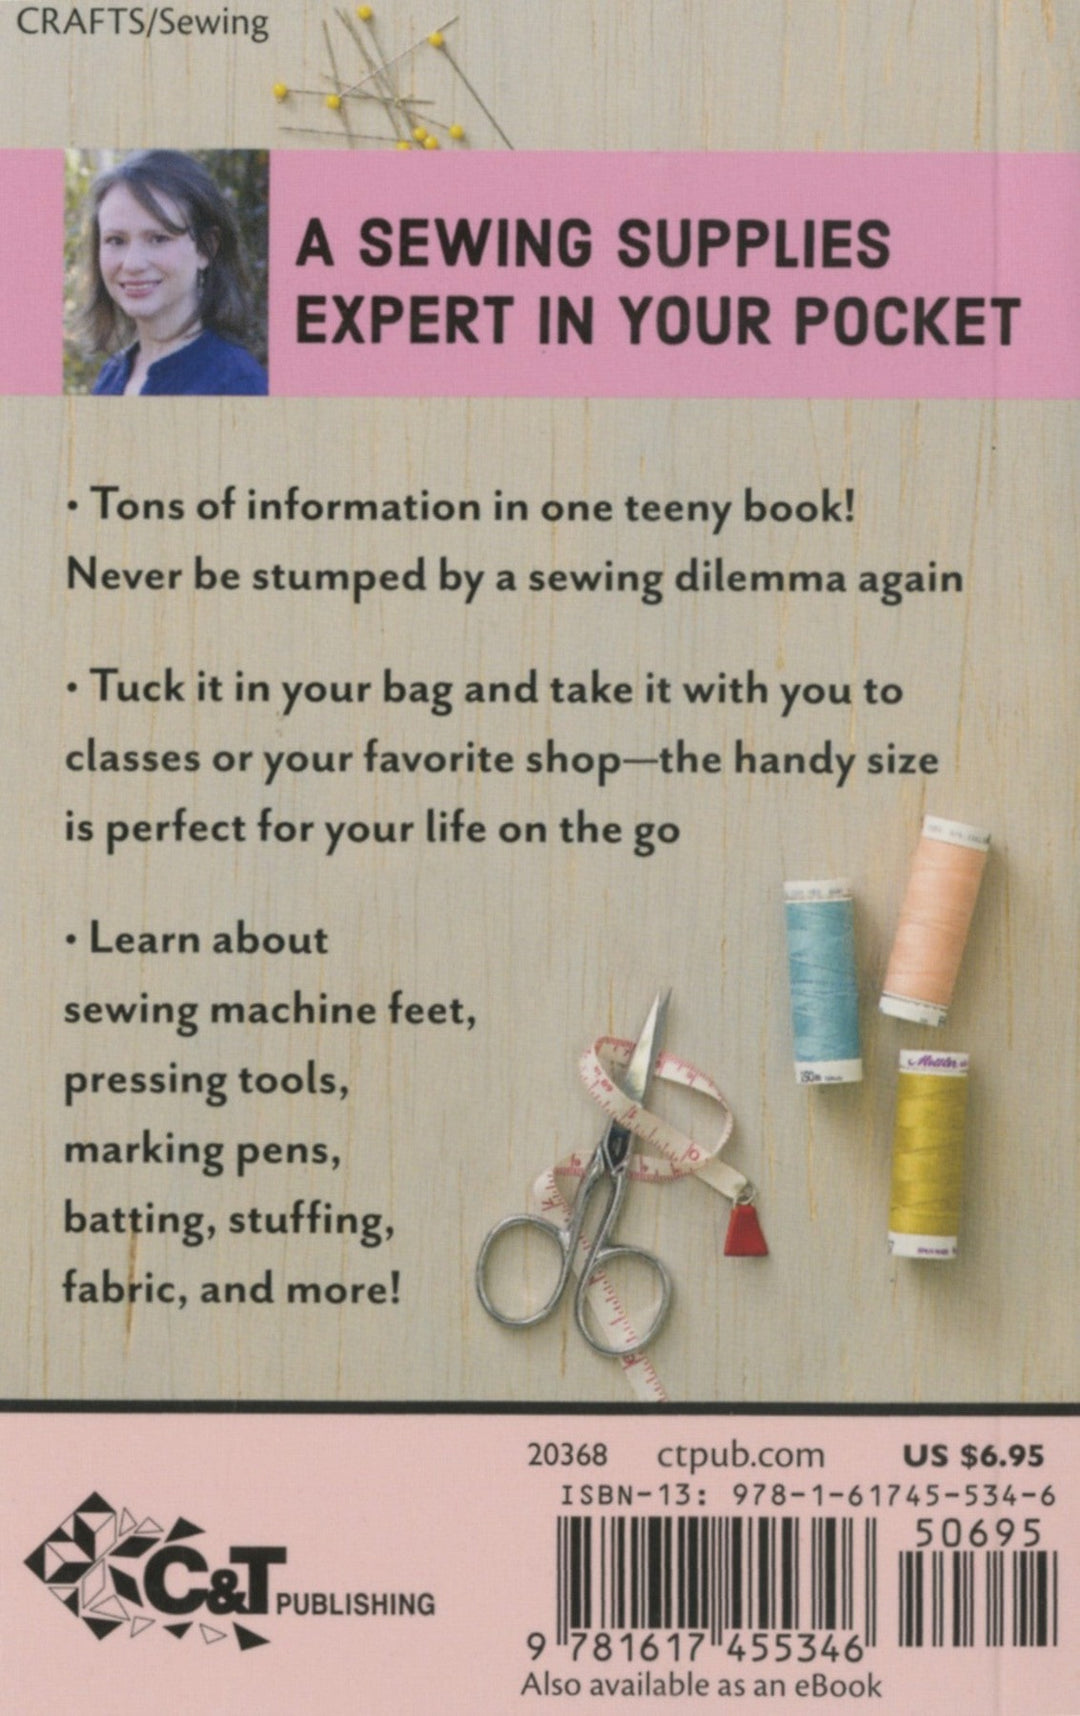 Sewing Supplies Handy Pocket Guide (Softcover) (5866519167141)